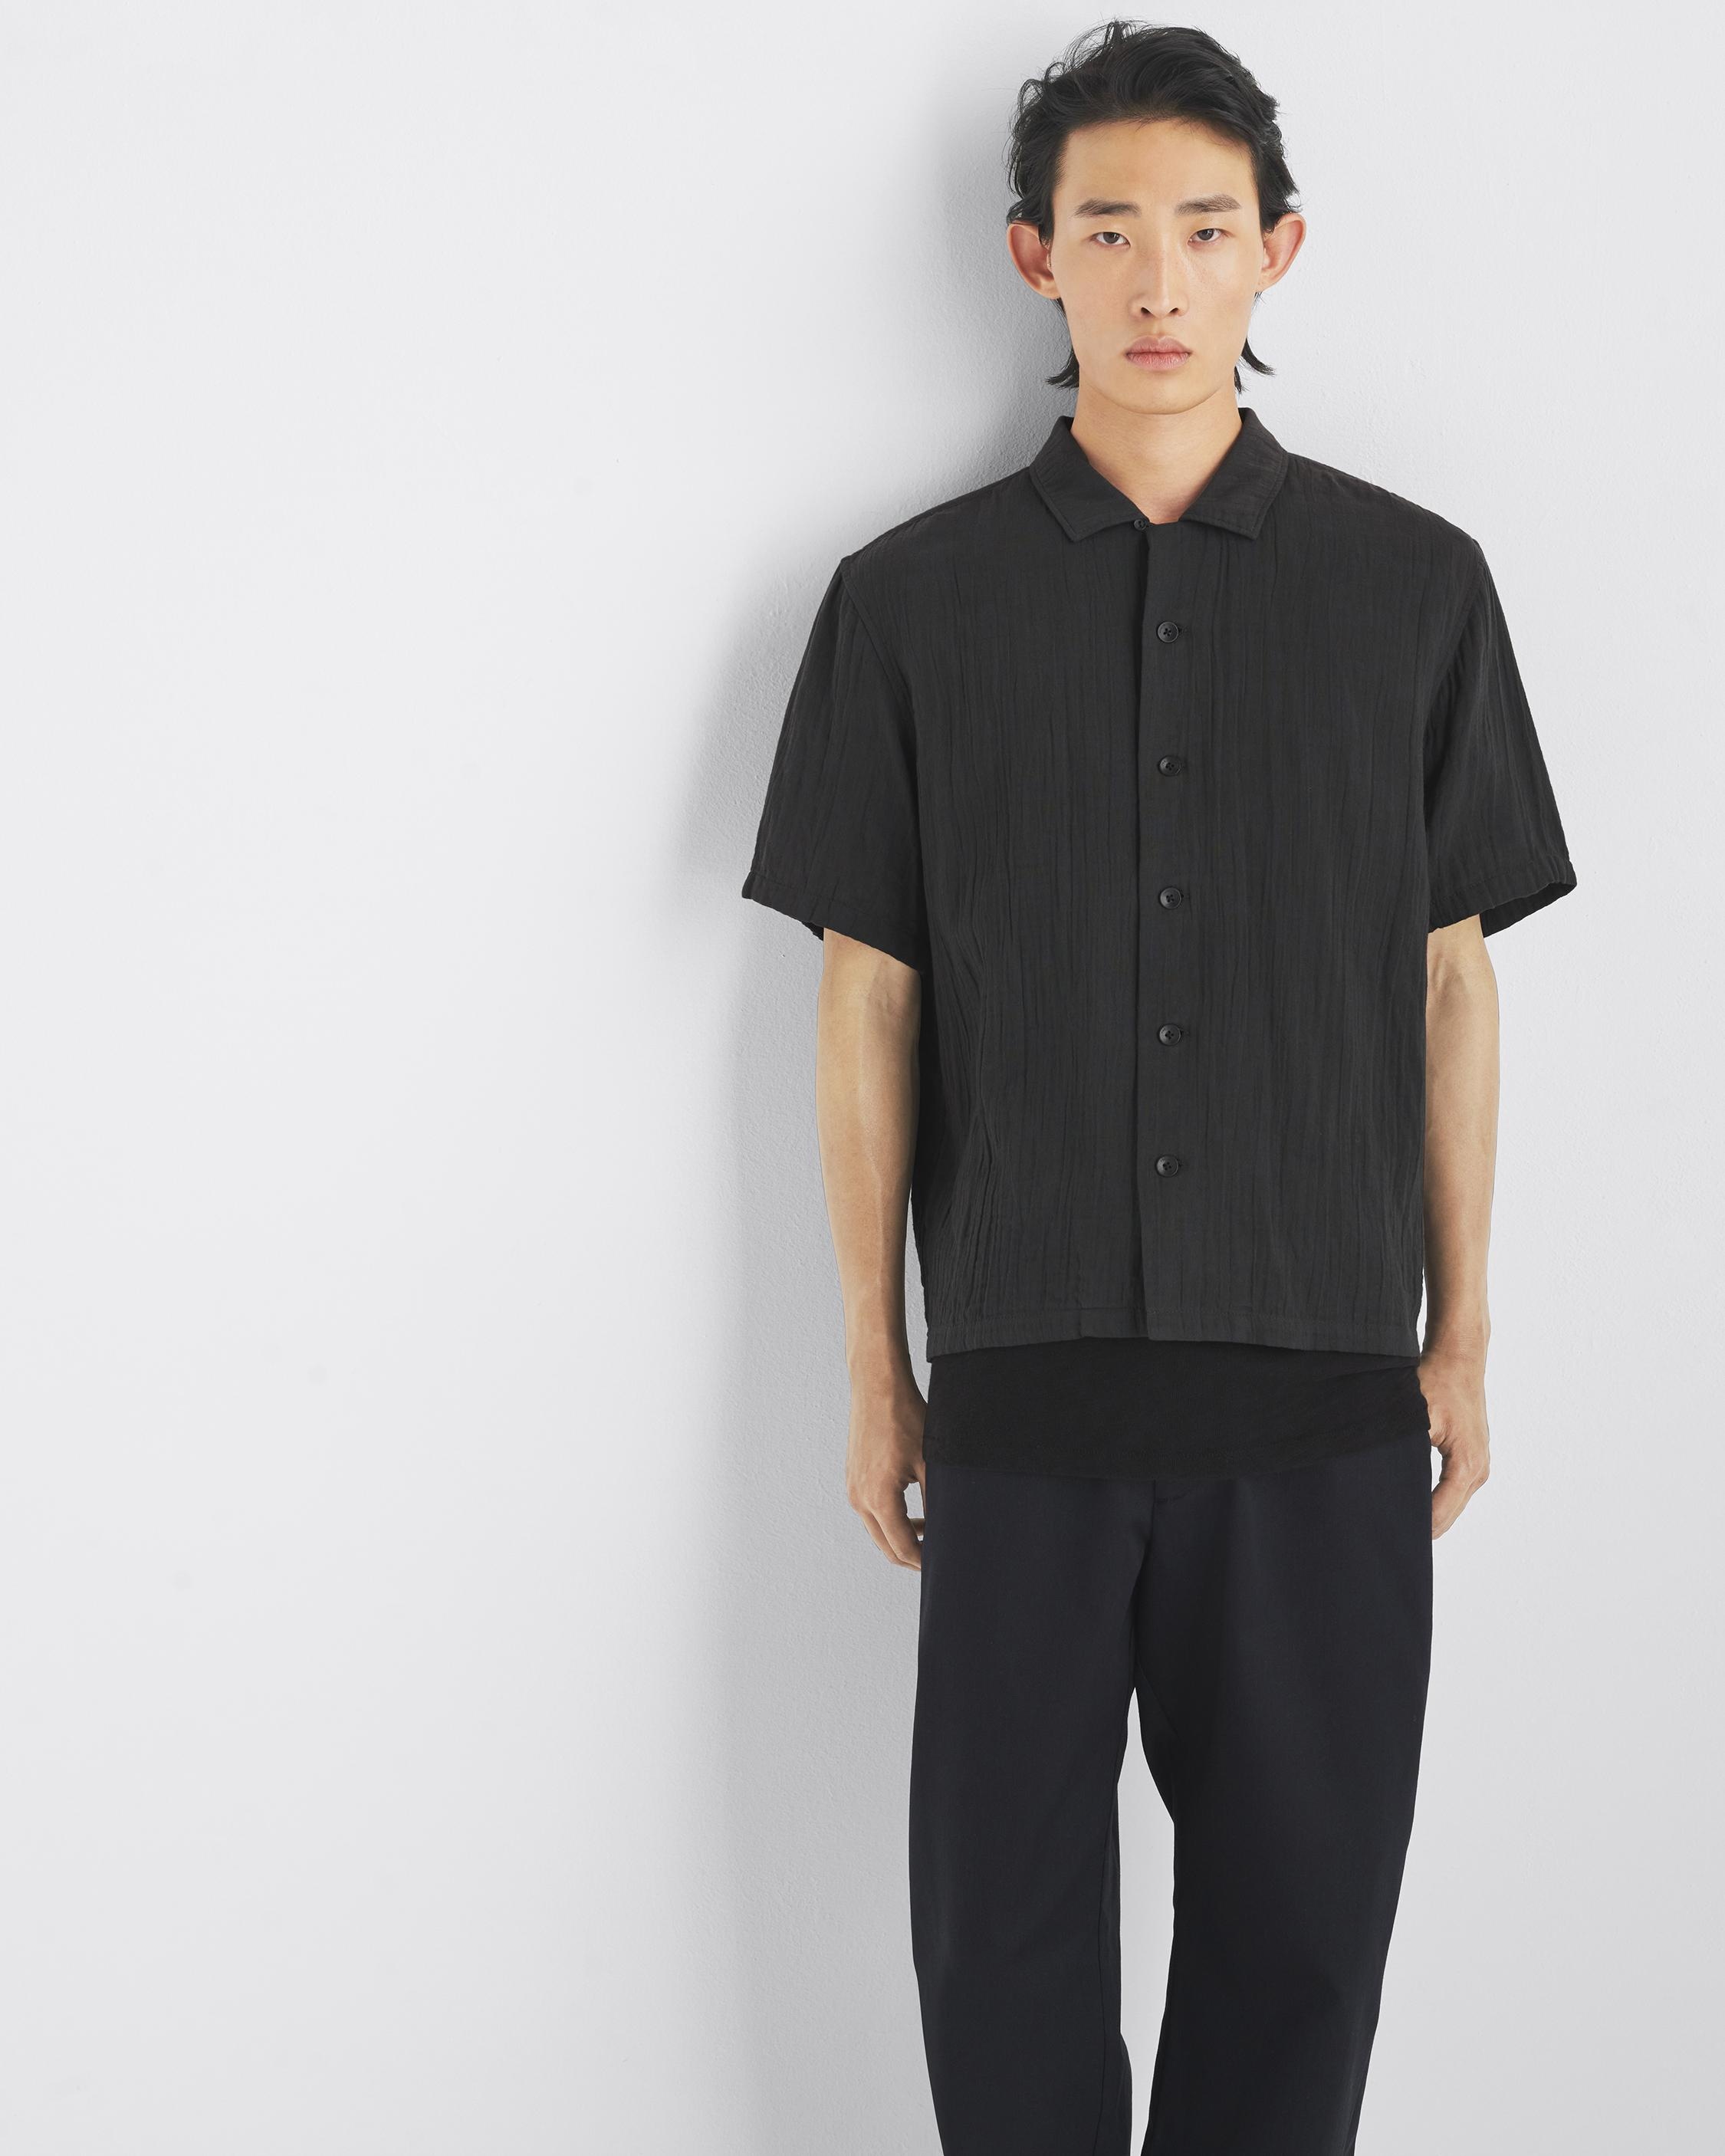 Avery Gauze Camp Shirt
Relaxed Fit - 3